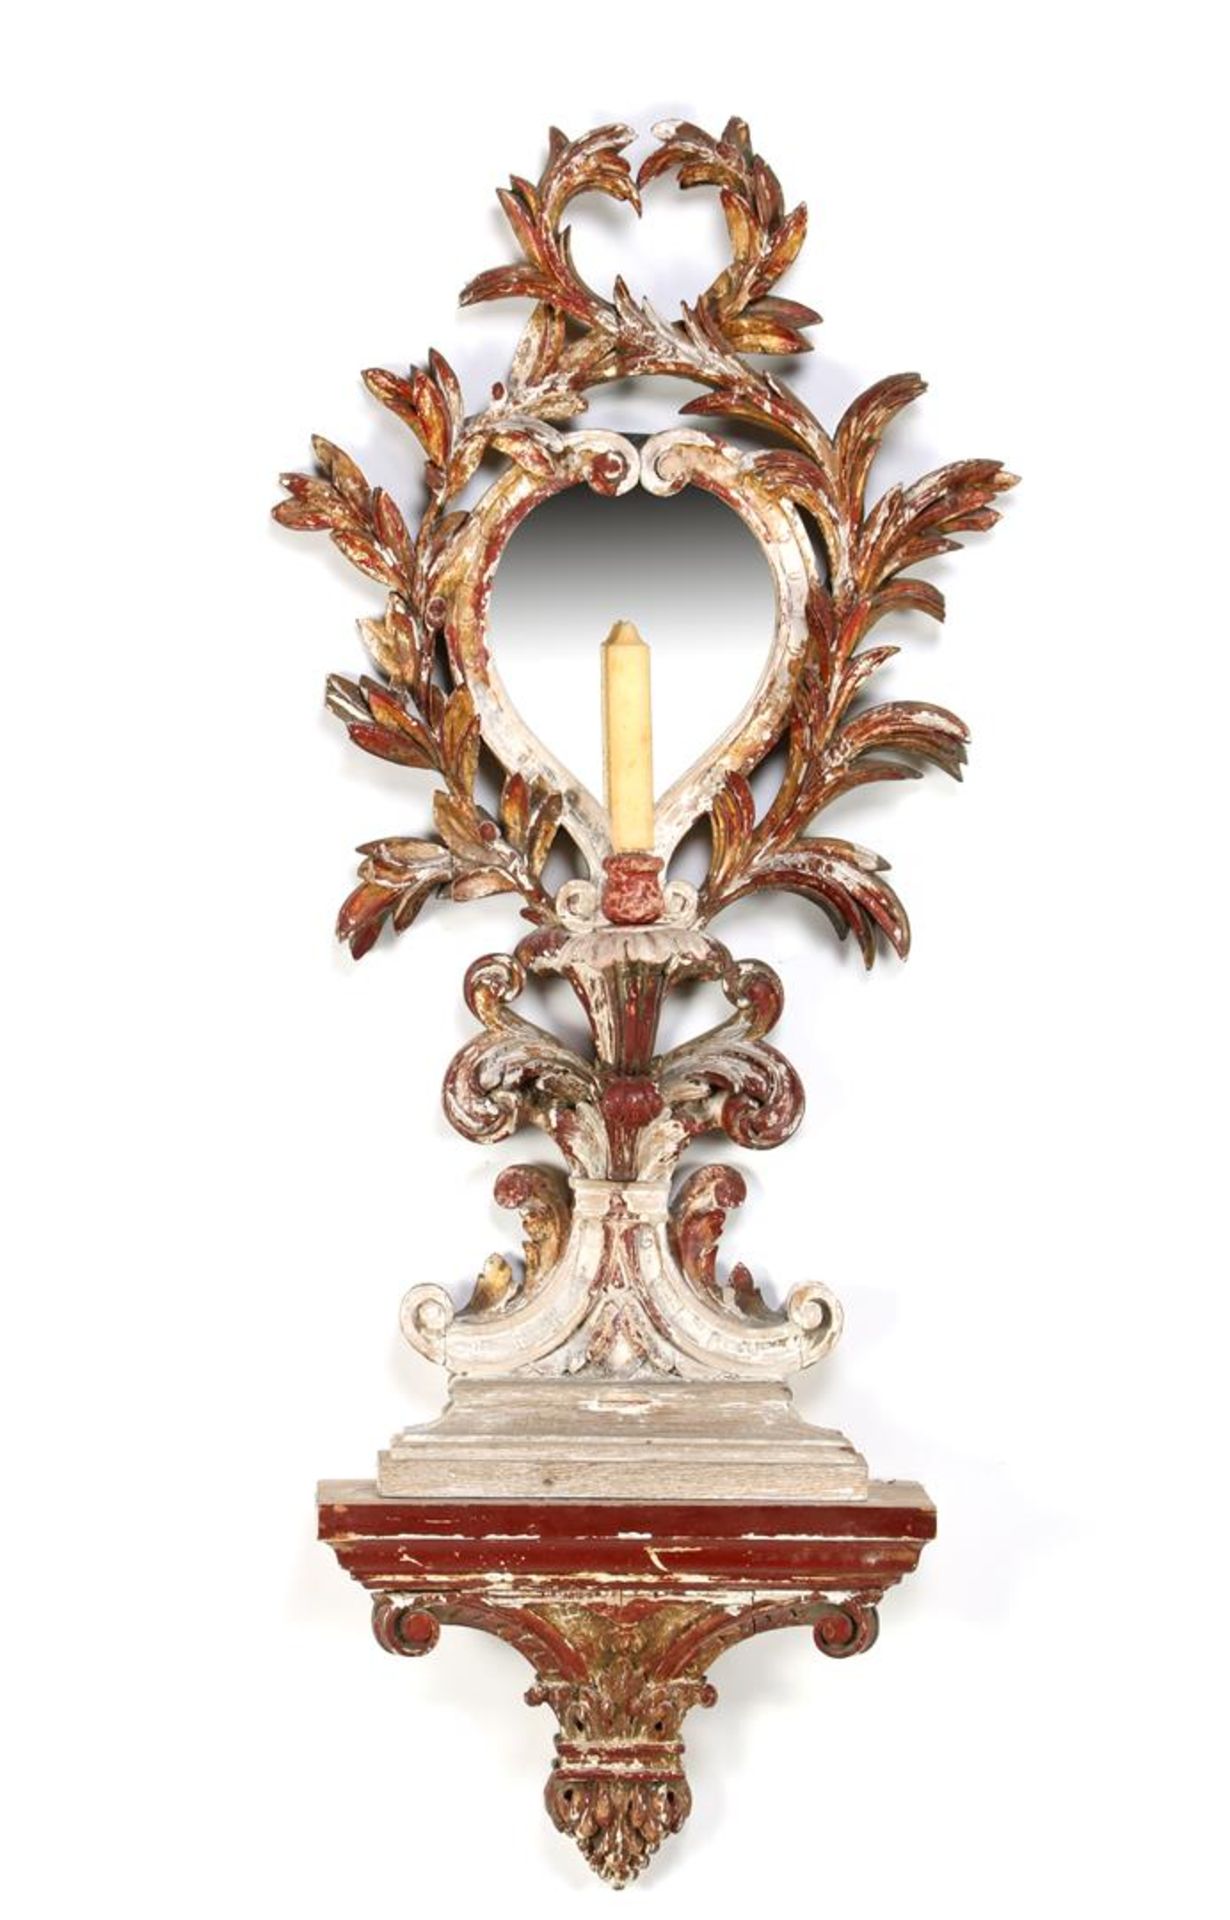 18th century wooden richly decorated wall mirror